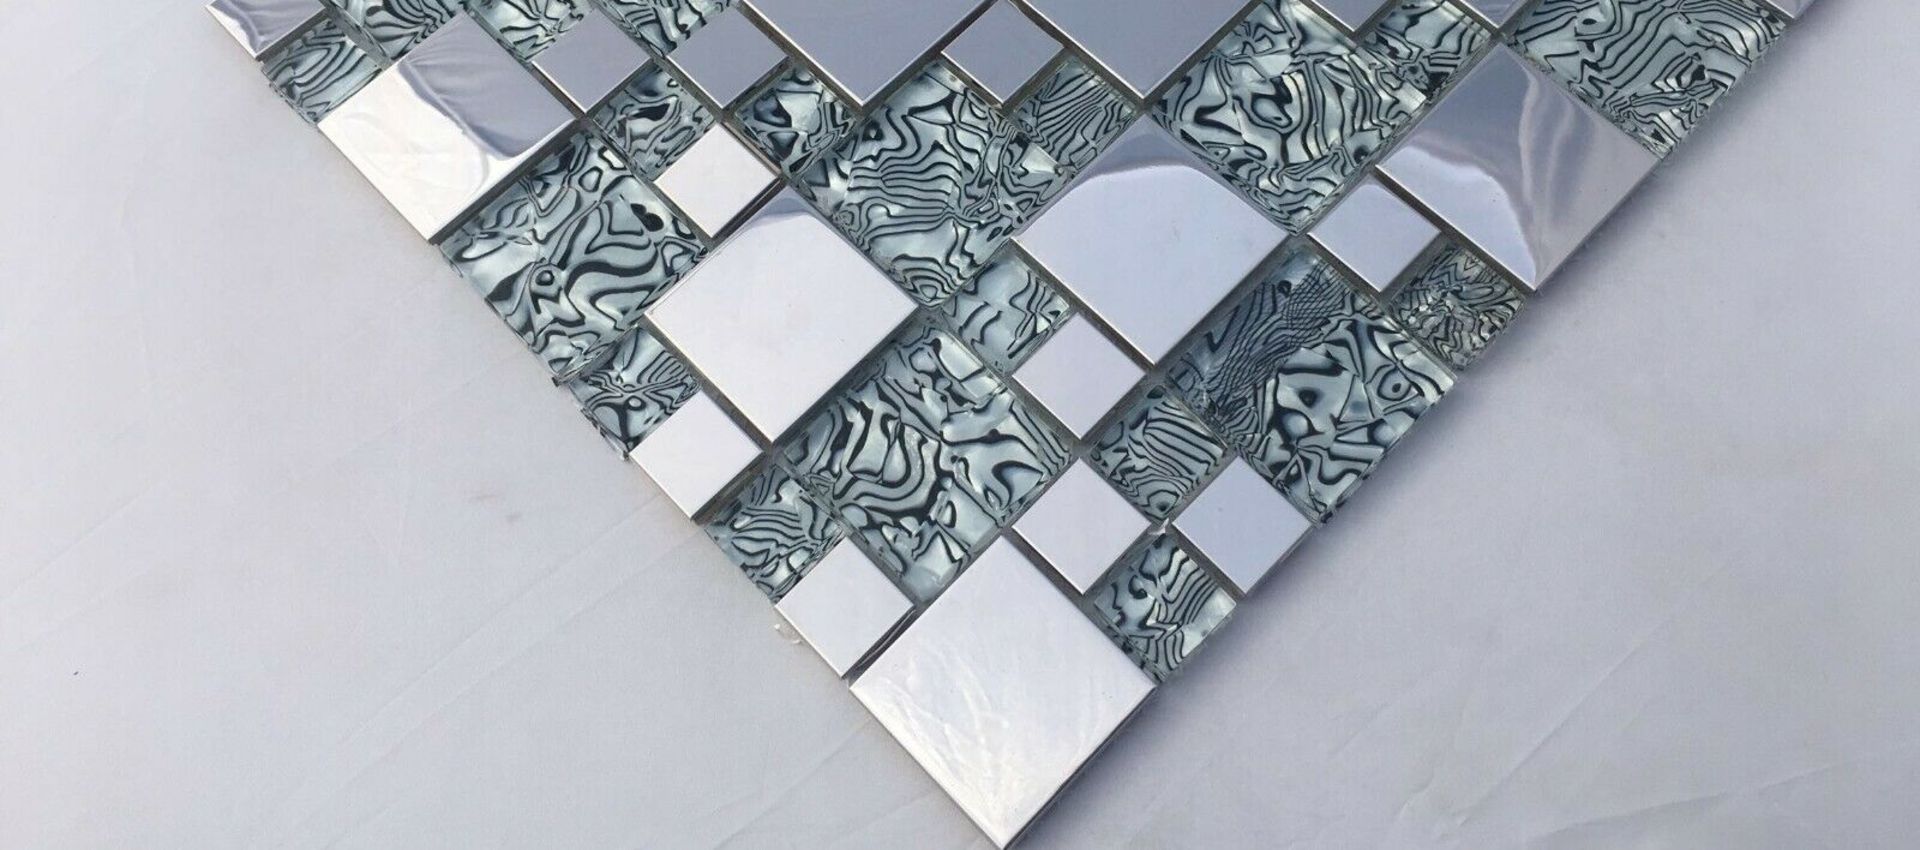 Stock Clearance High Quality Glass/Stainless Steel Mosaic Tiles - 11 Sheets - One Square Metres - Image 3 of 3